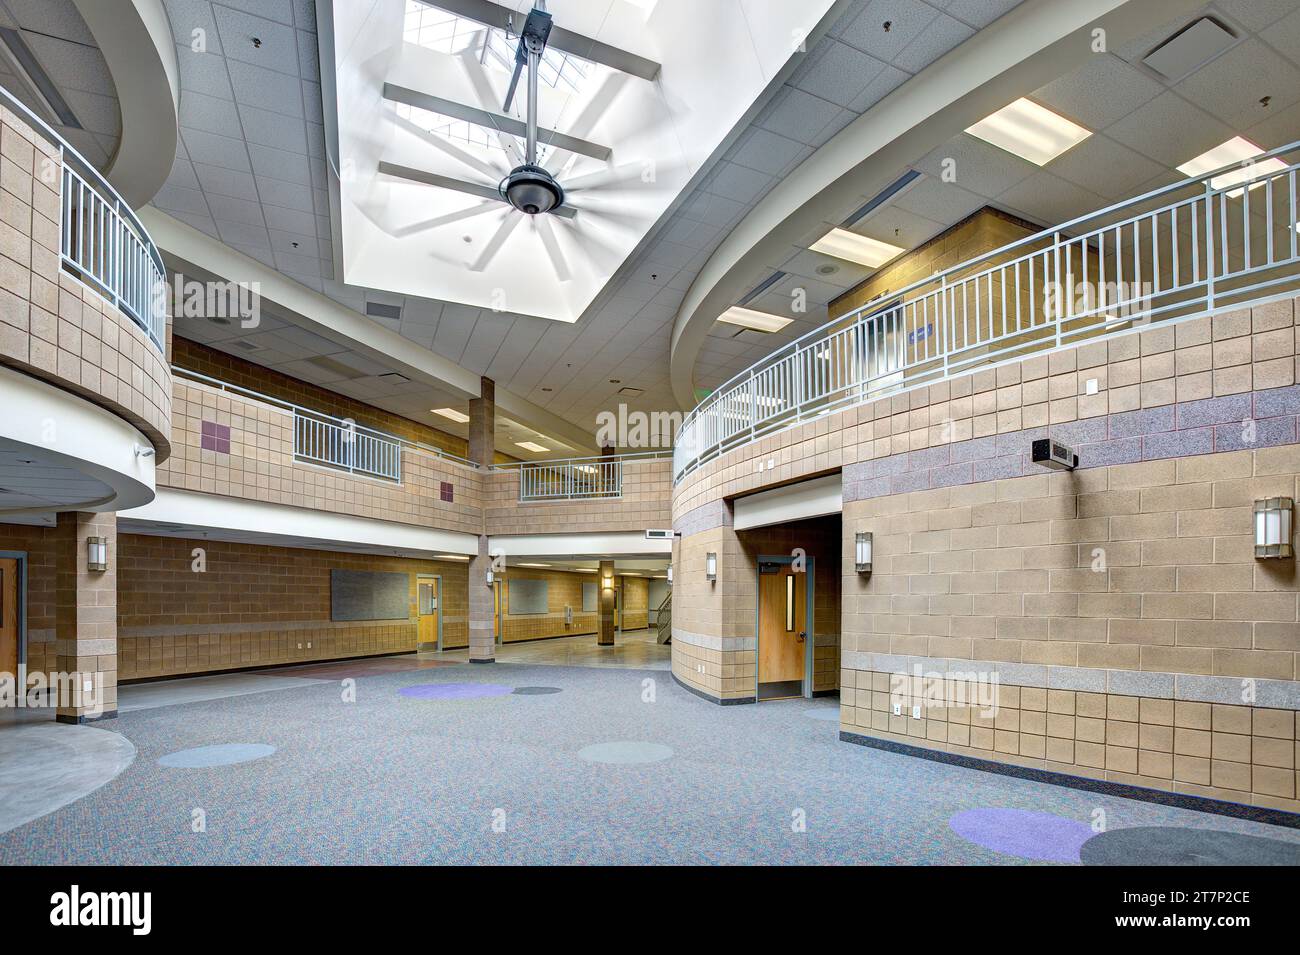 The main hallway in an elementary school, with money saving cnstruction materials, high efficency computer controlled LED light fixtures, and a large Stock Photo